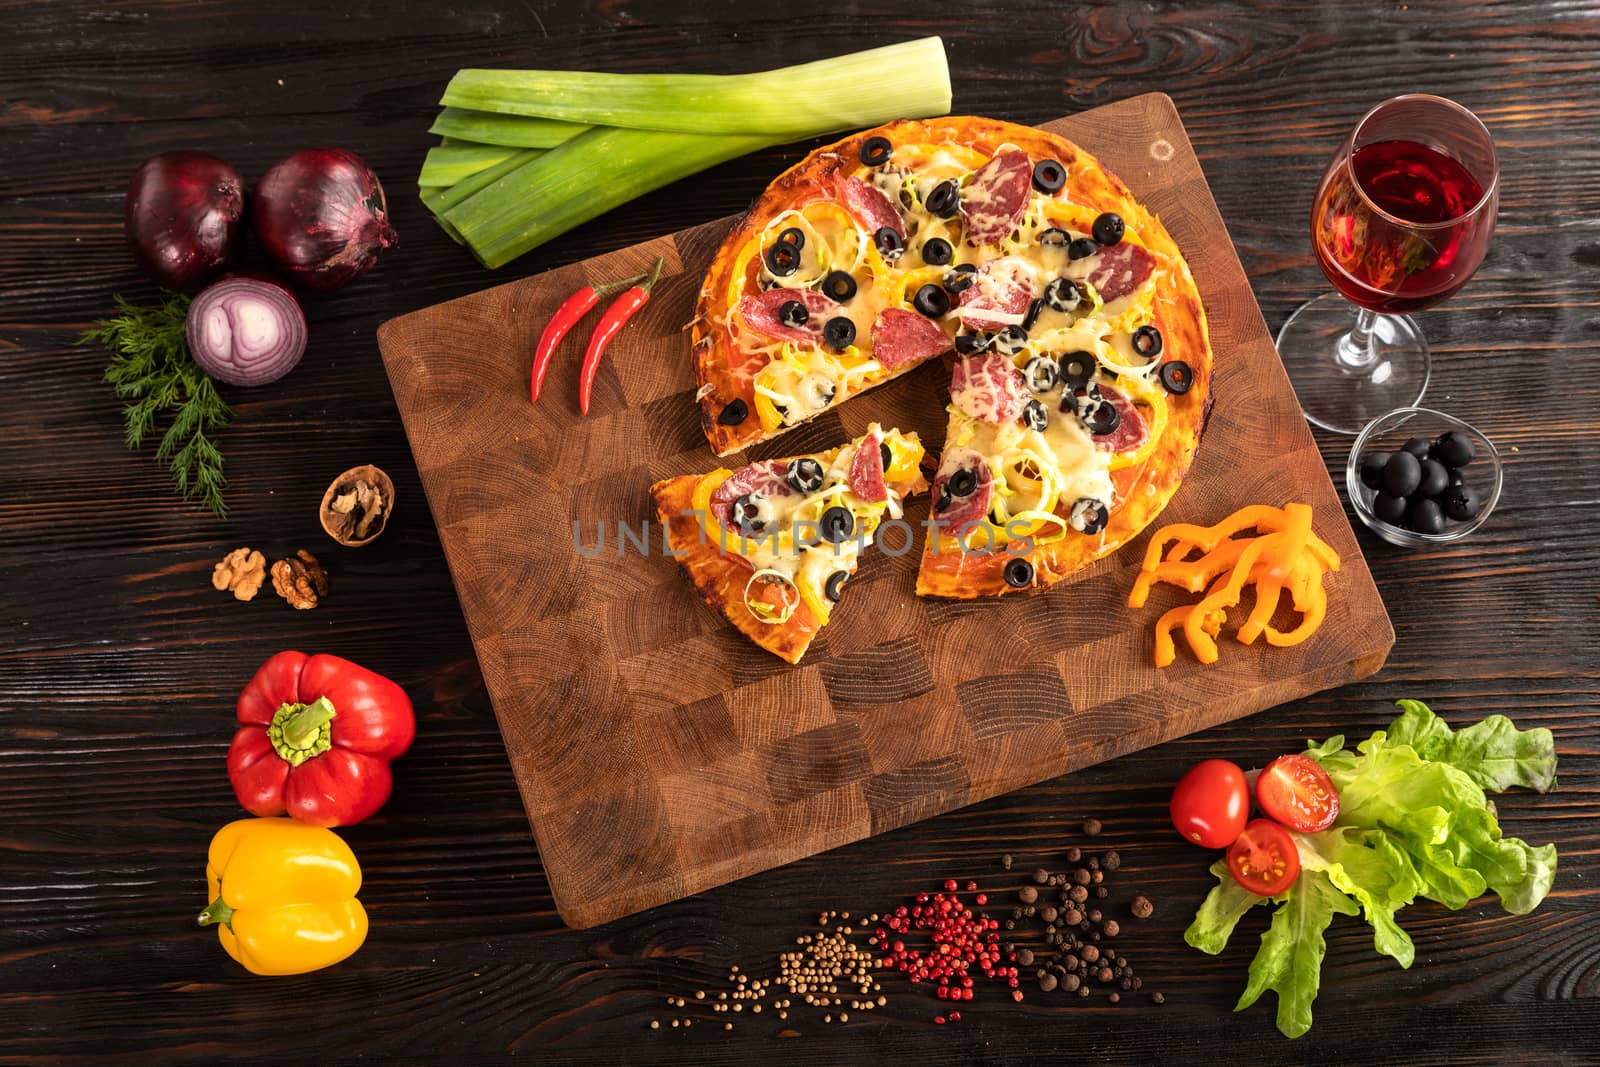 Pizza on a wooden cutting board next to vegetables, spices and a glass of wine